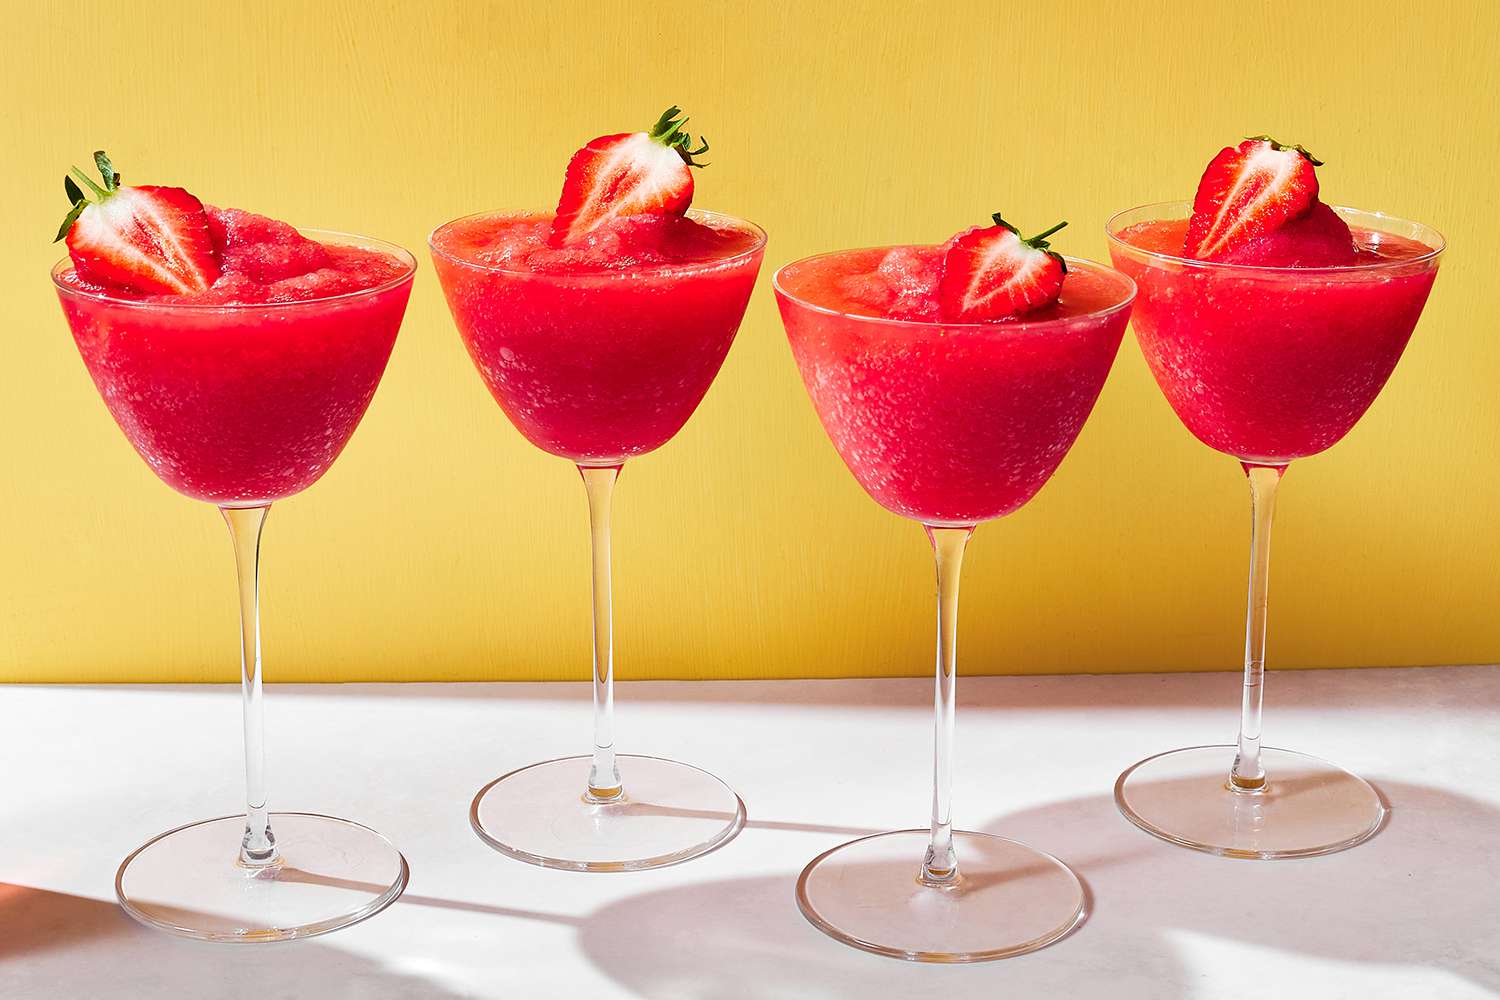 Four glasses of frose garnished with strawberries